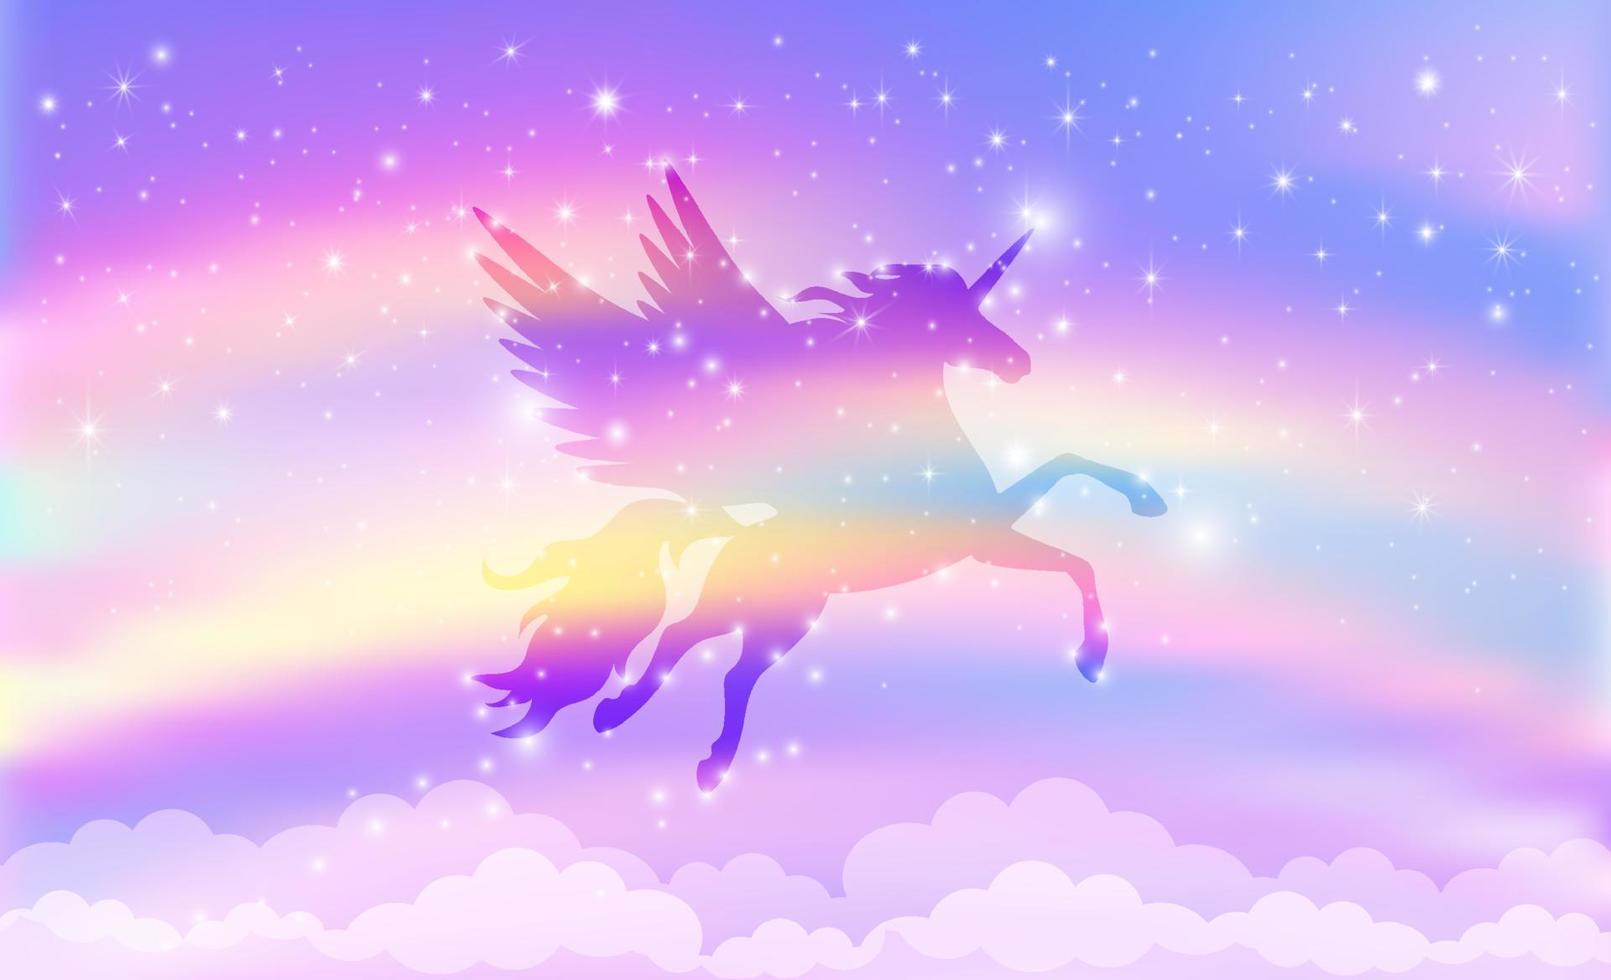 Silhouette of a unicorn flies against the background of a rainbow sky with stars. Vector illustration.